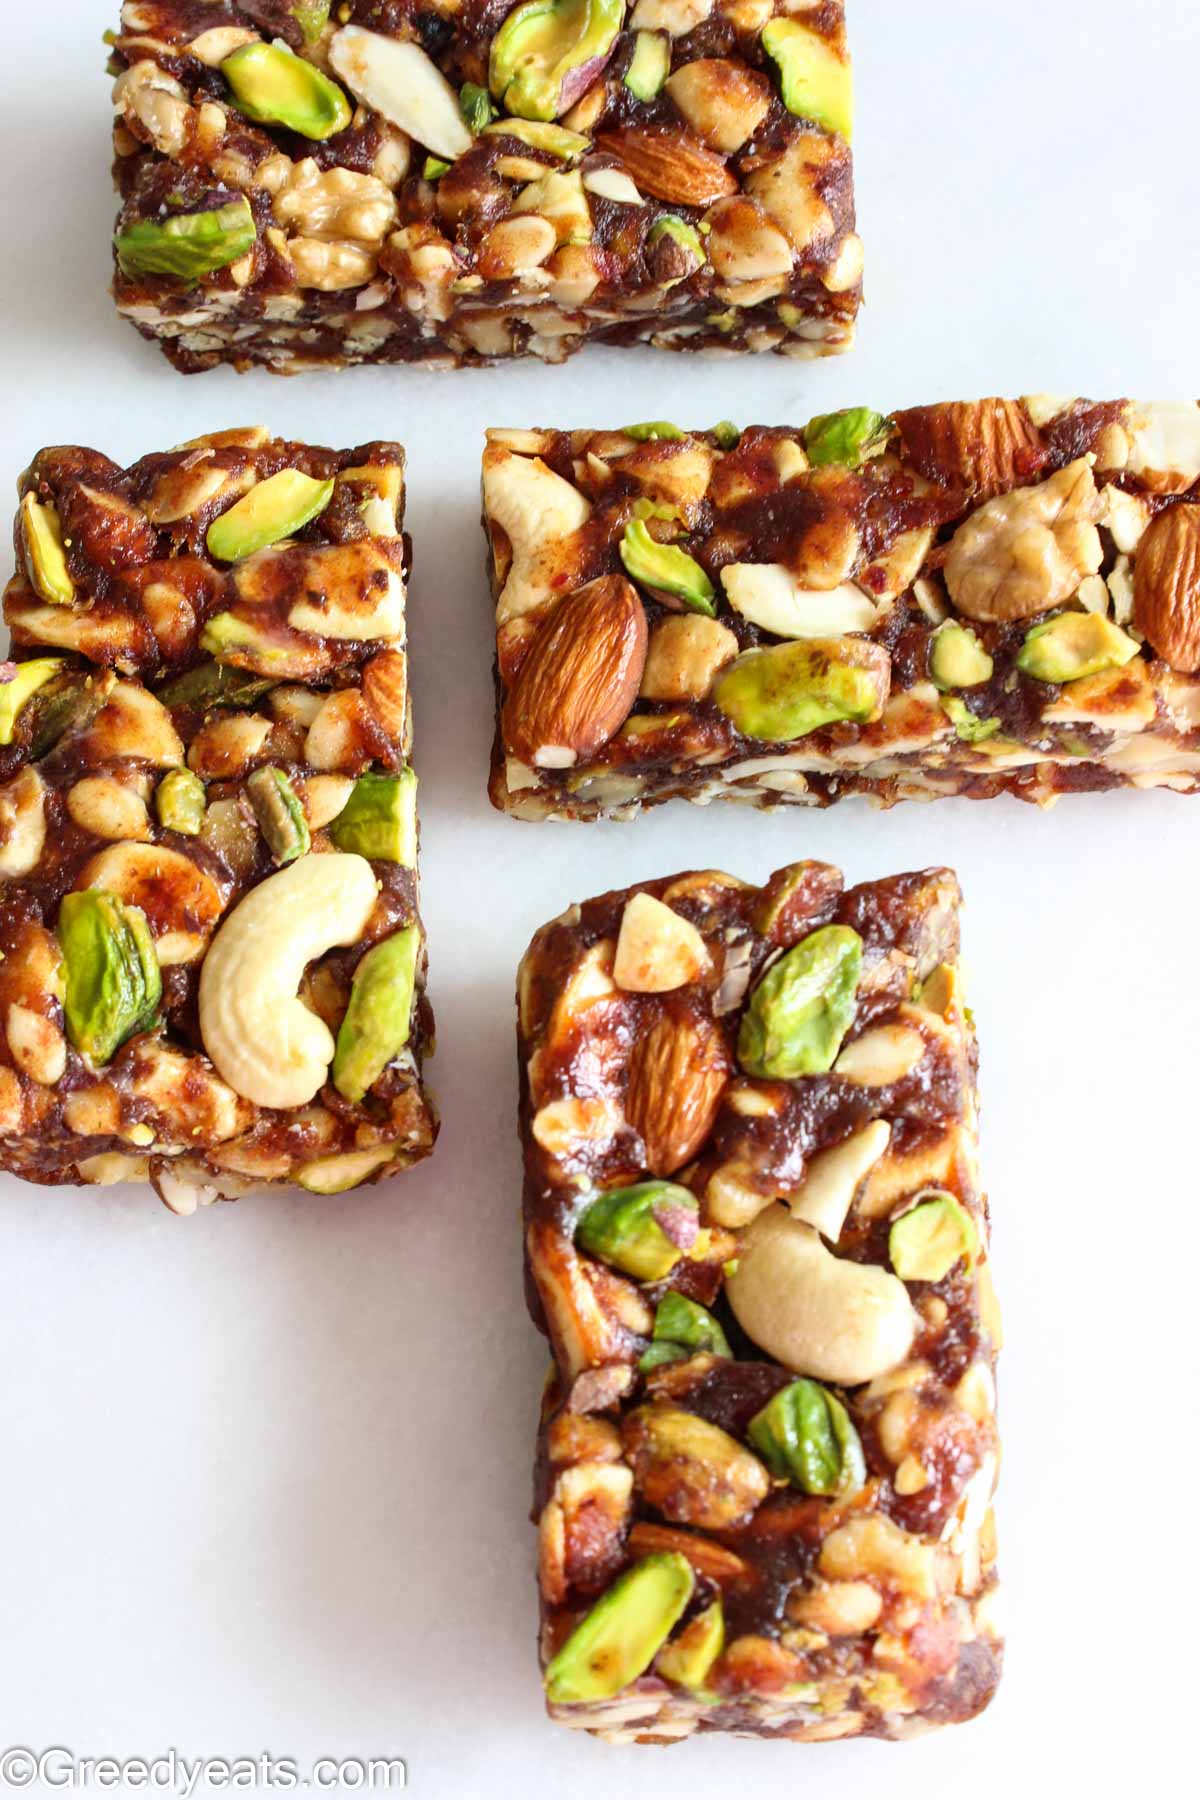 Date nut bars are Healthy Bars loaded with nuts and nutrients. Served as Breakfast Bars on a white board.